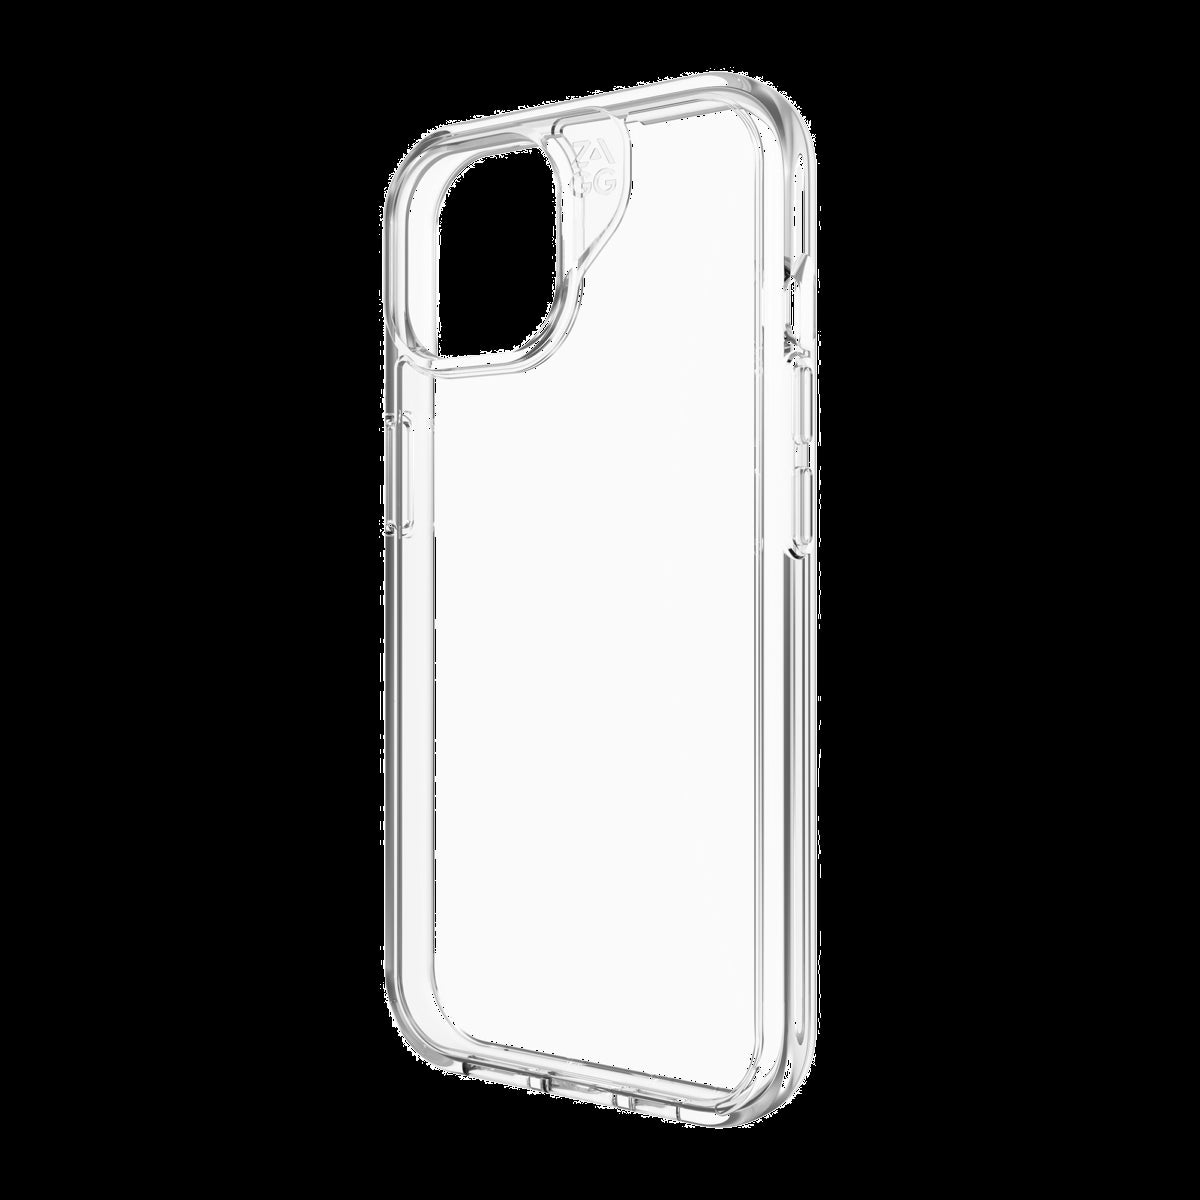 Strengthened with Graphene, ZAGG's Crystal Palace case combines an ultra-slim, crystal-clear profile with up to 13 ft drop protection and seamless wireless charging compatibility.